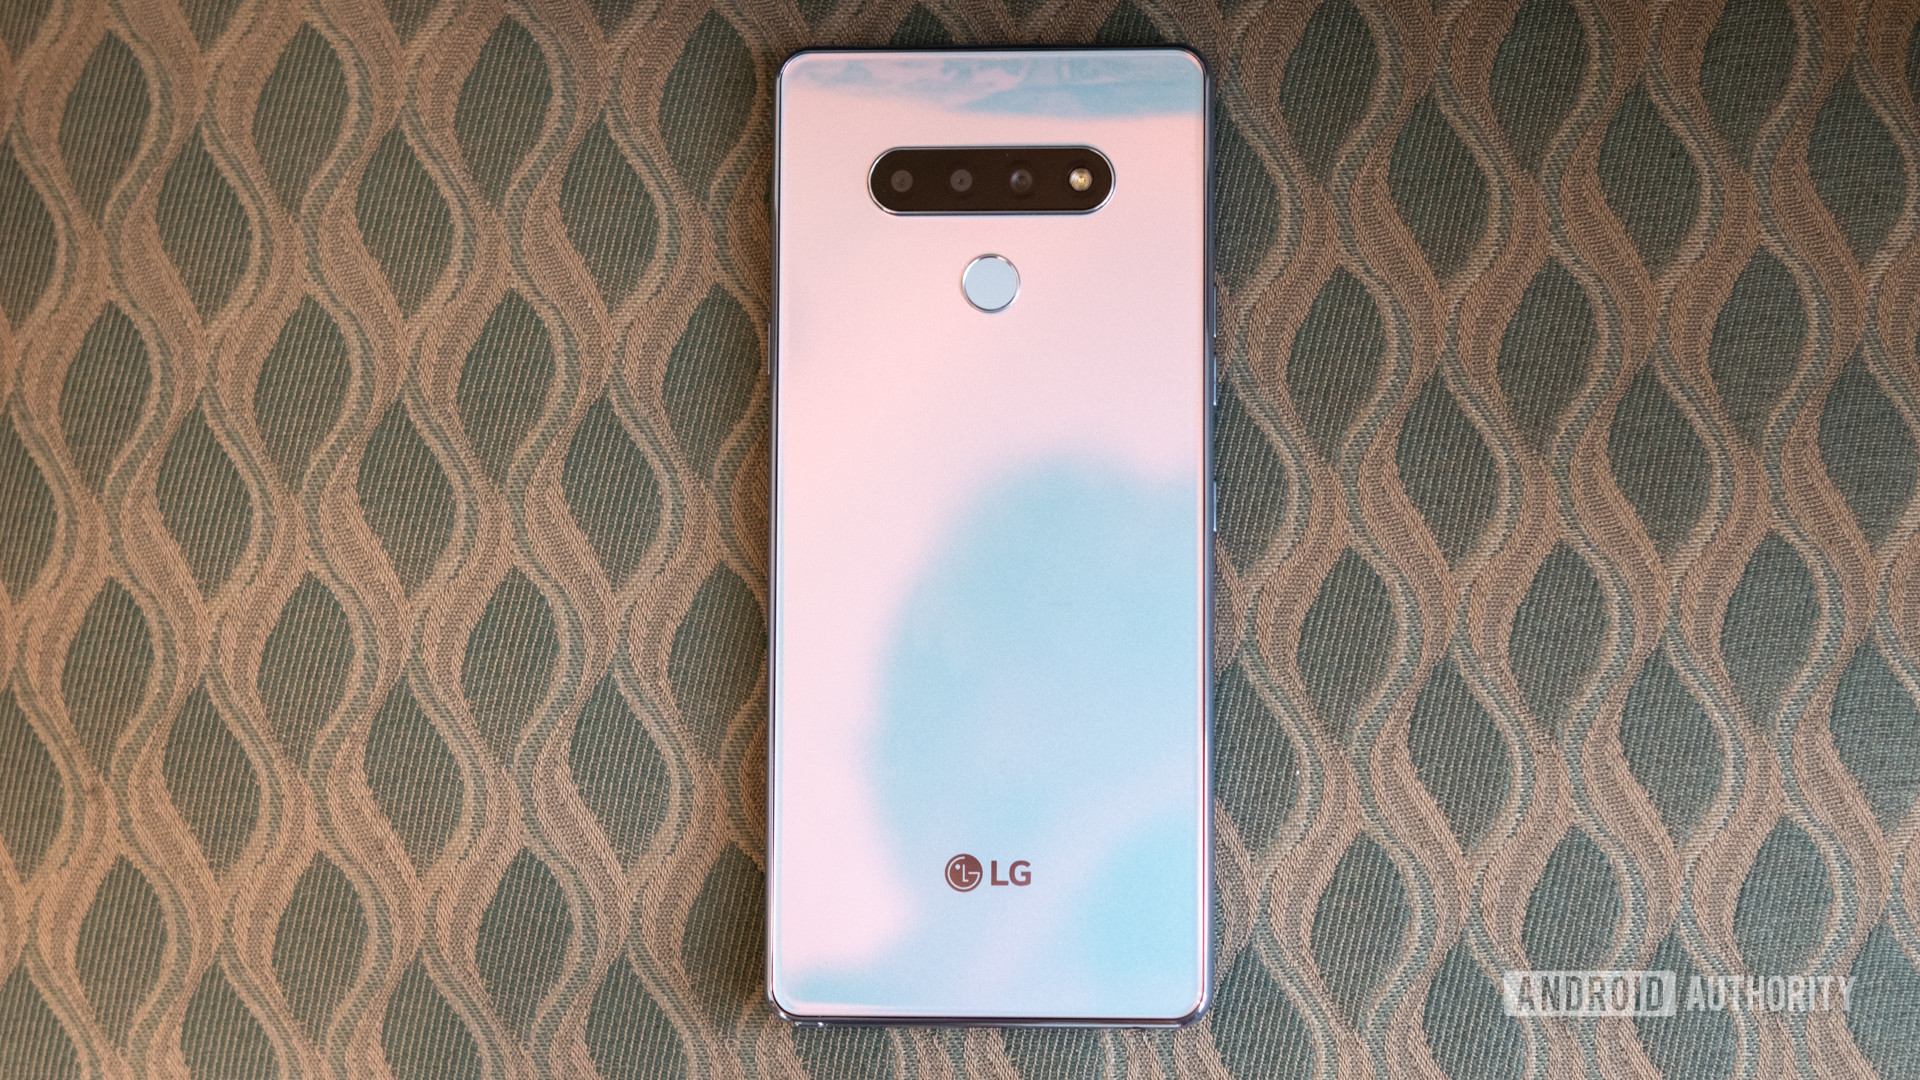 LG Stylo 6 back panel on a patterned chair